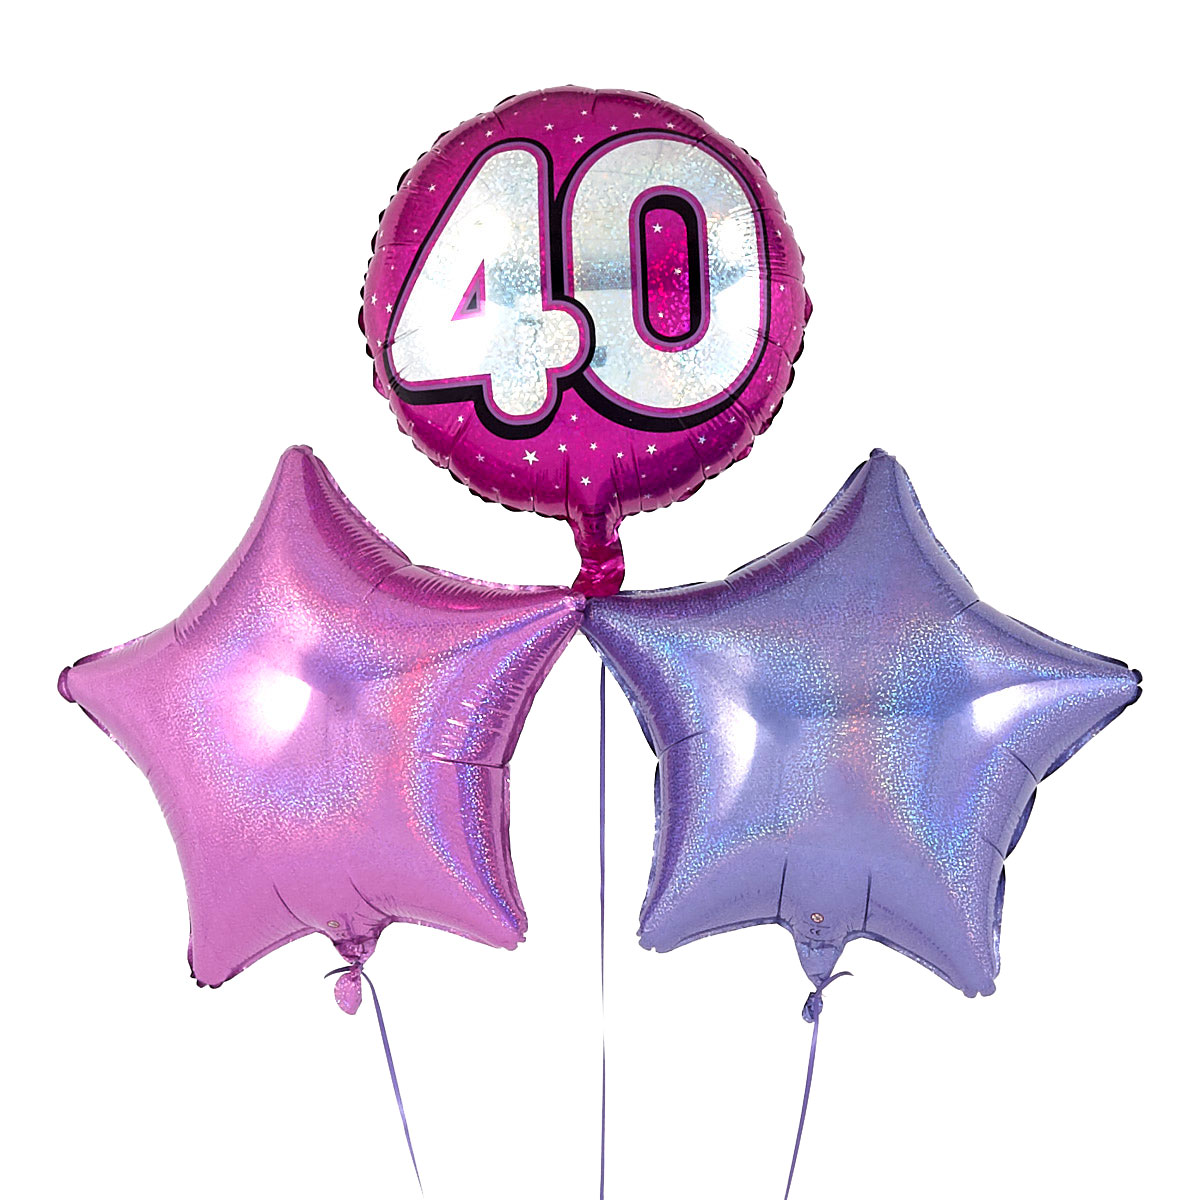 Pink 40th Birthday Balloon Bouquet - DELIVERED INFLATED!